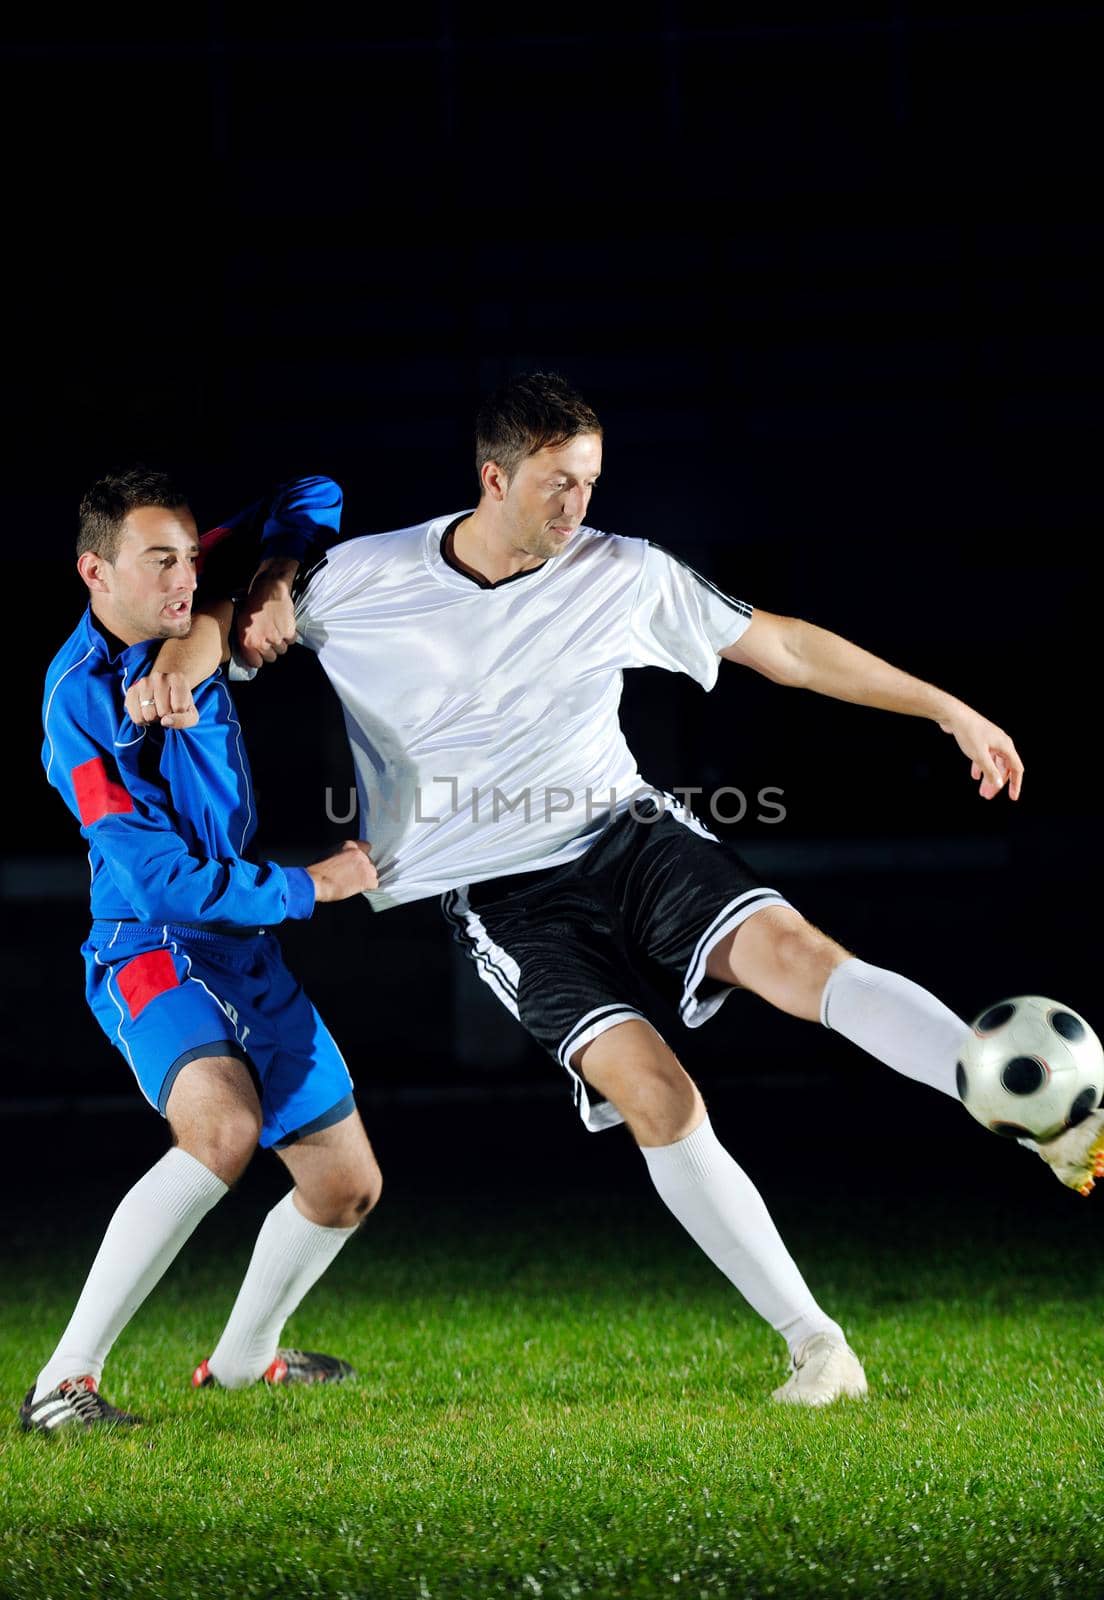 football players in action for the ball by dotshock